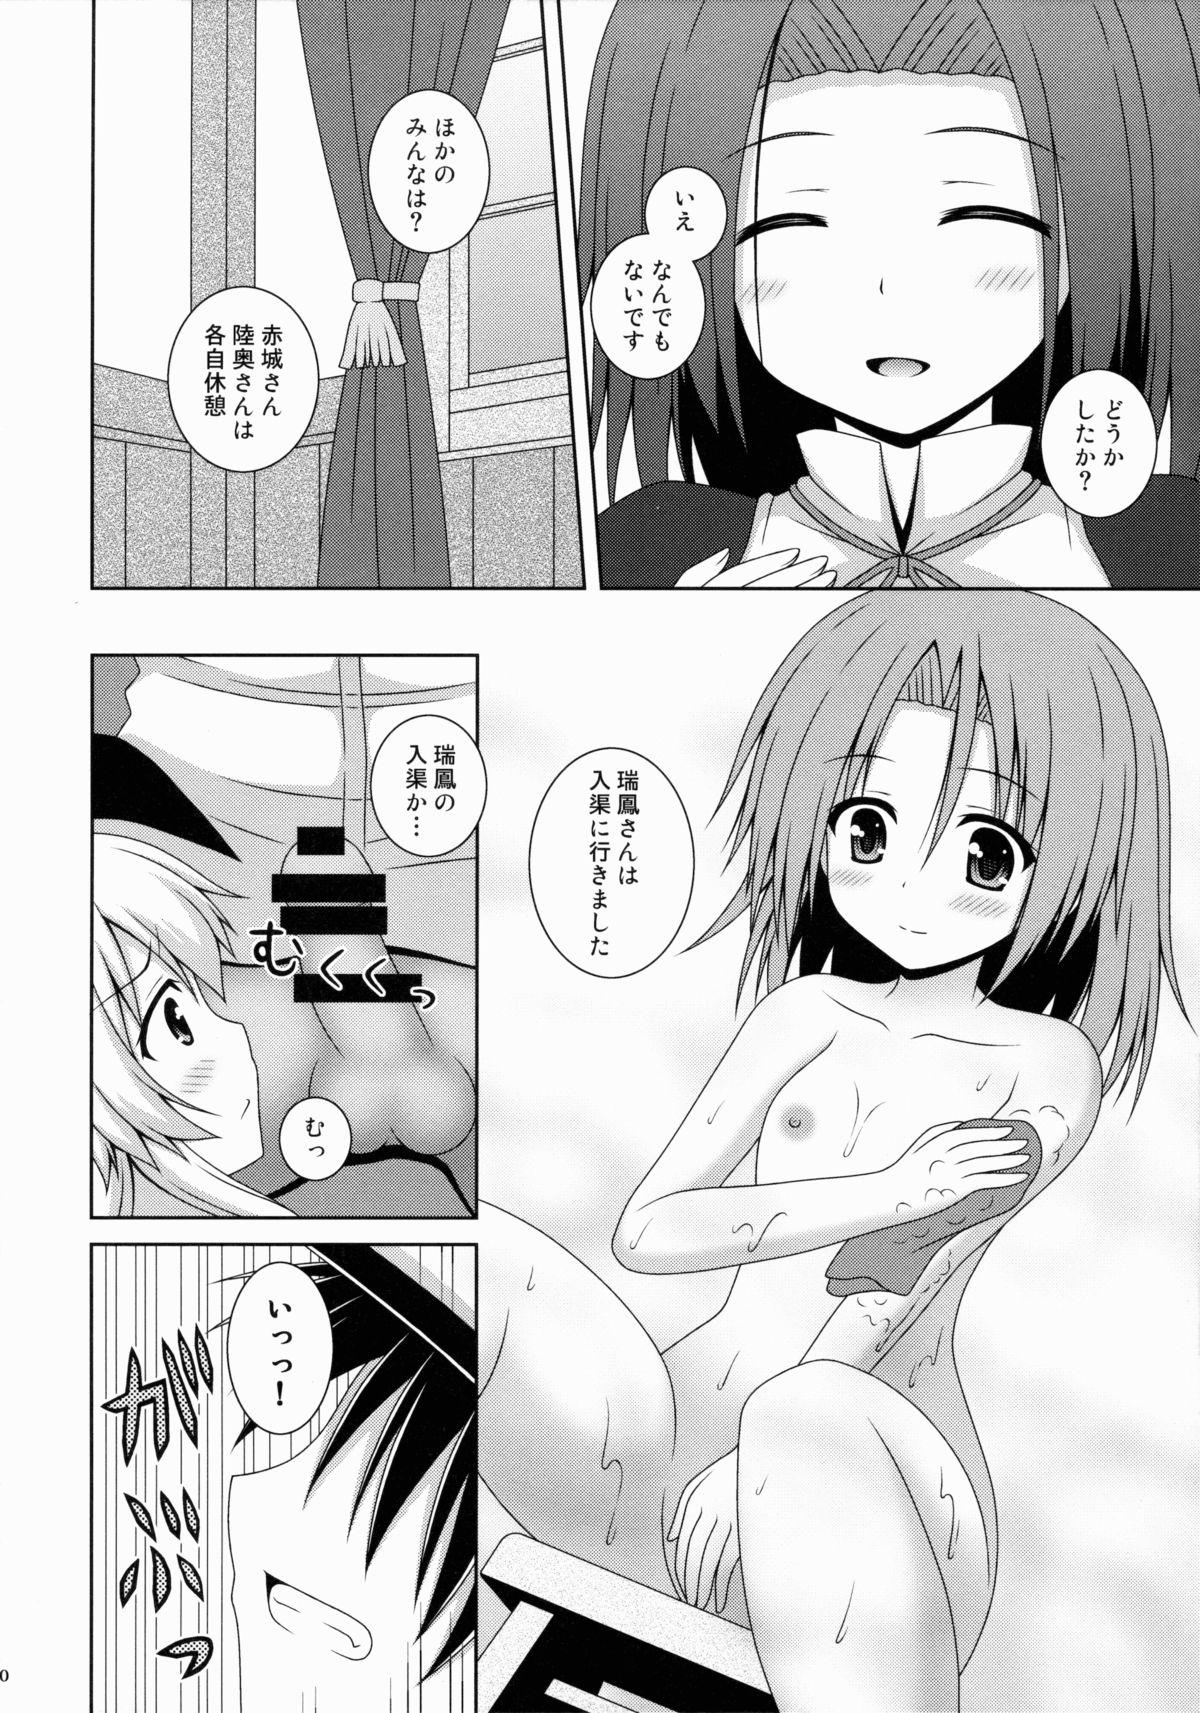 Russian Rapid Wind - Kantai collection Free 18 Year Old Porn - Page 9